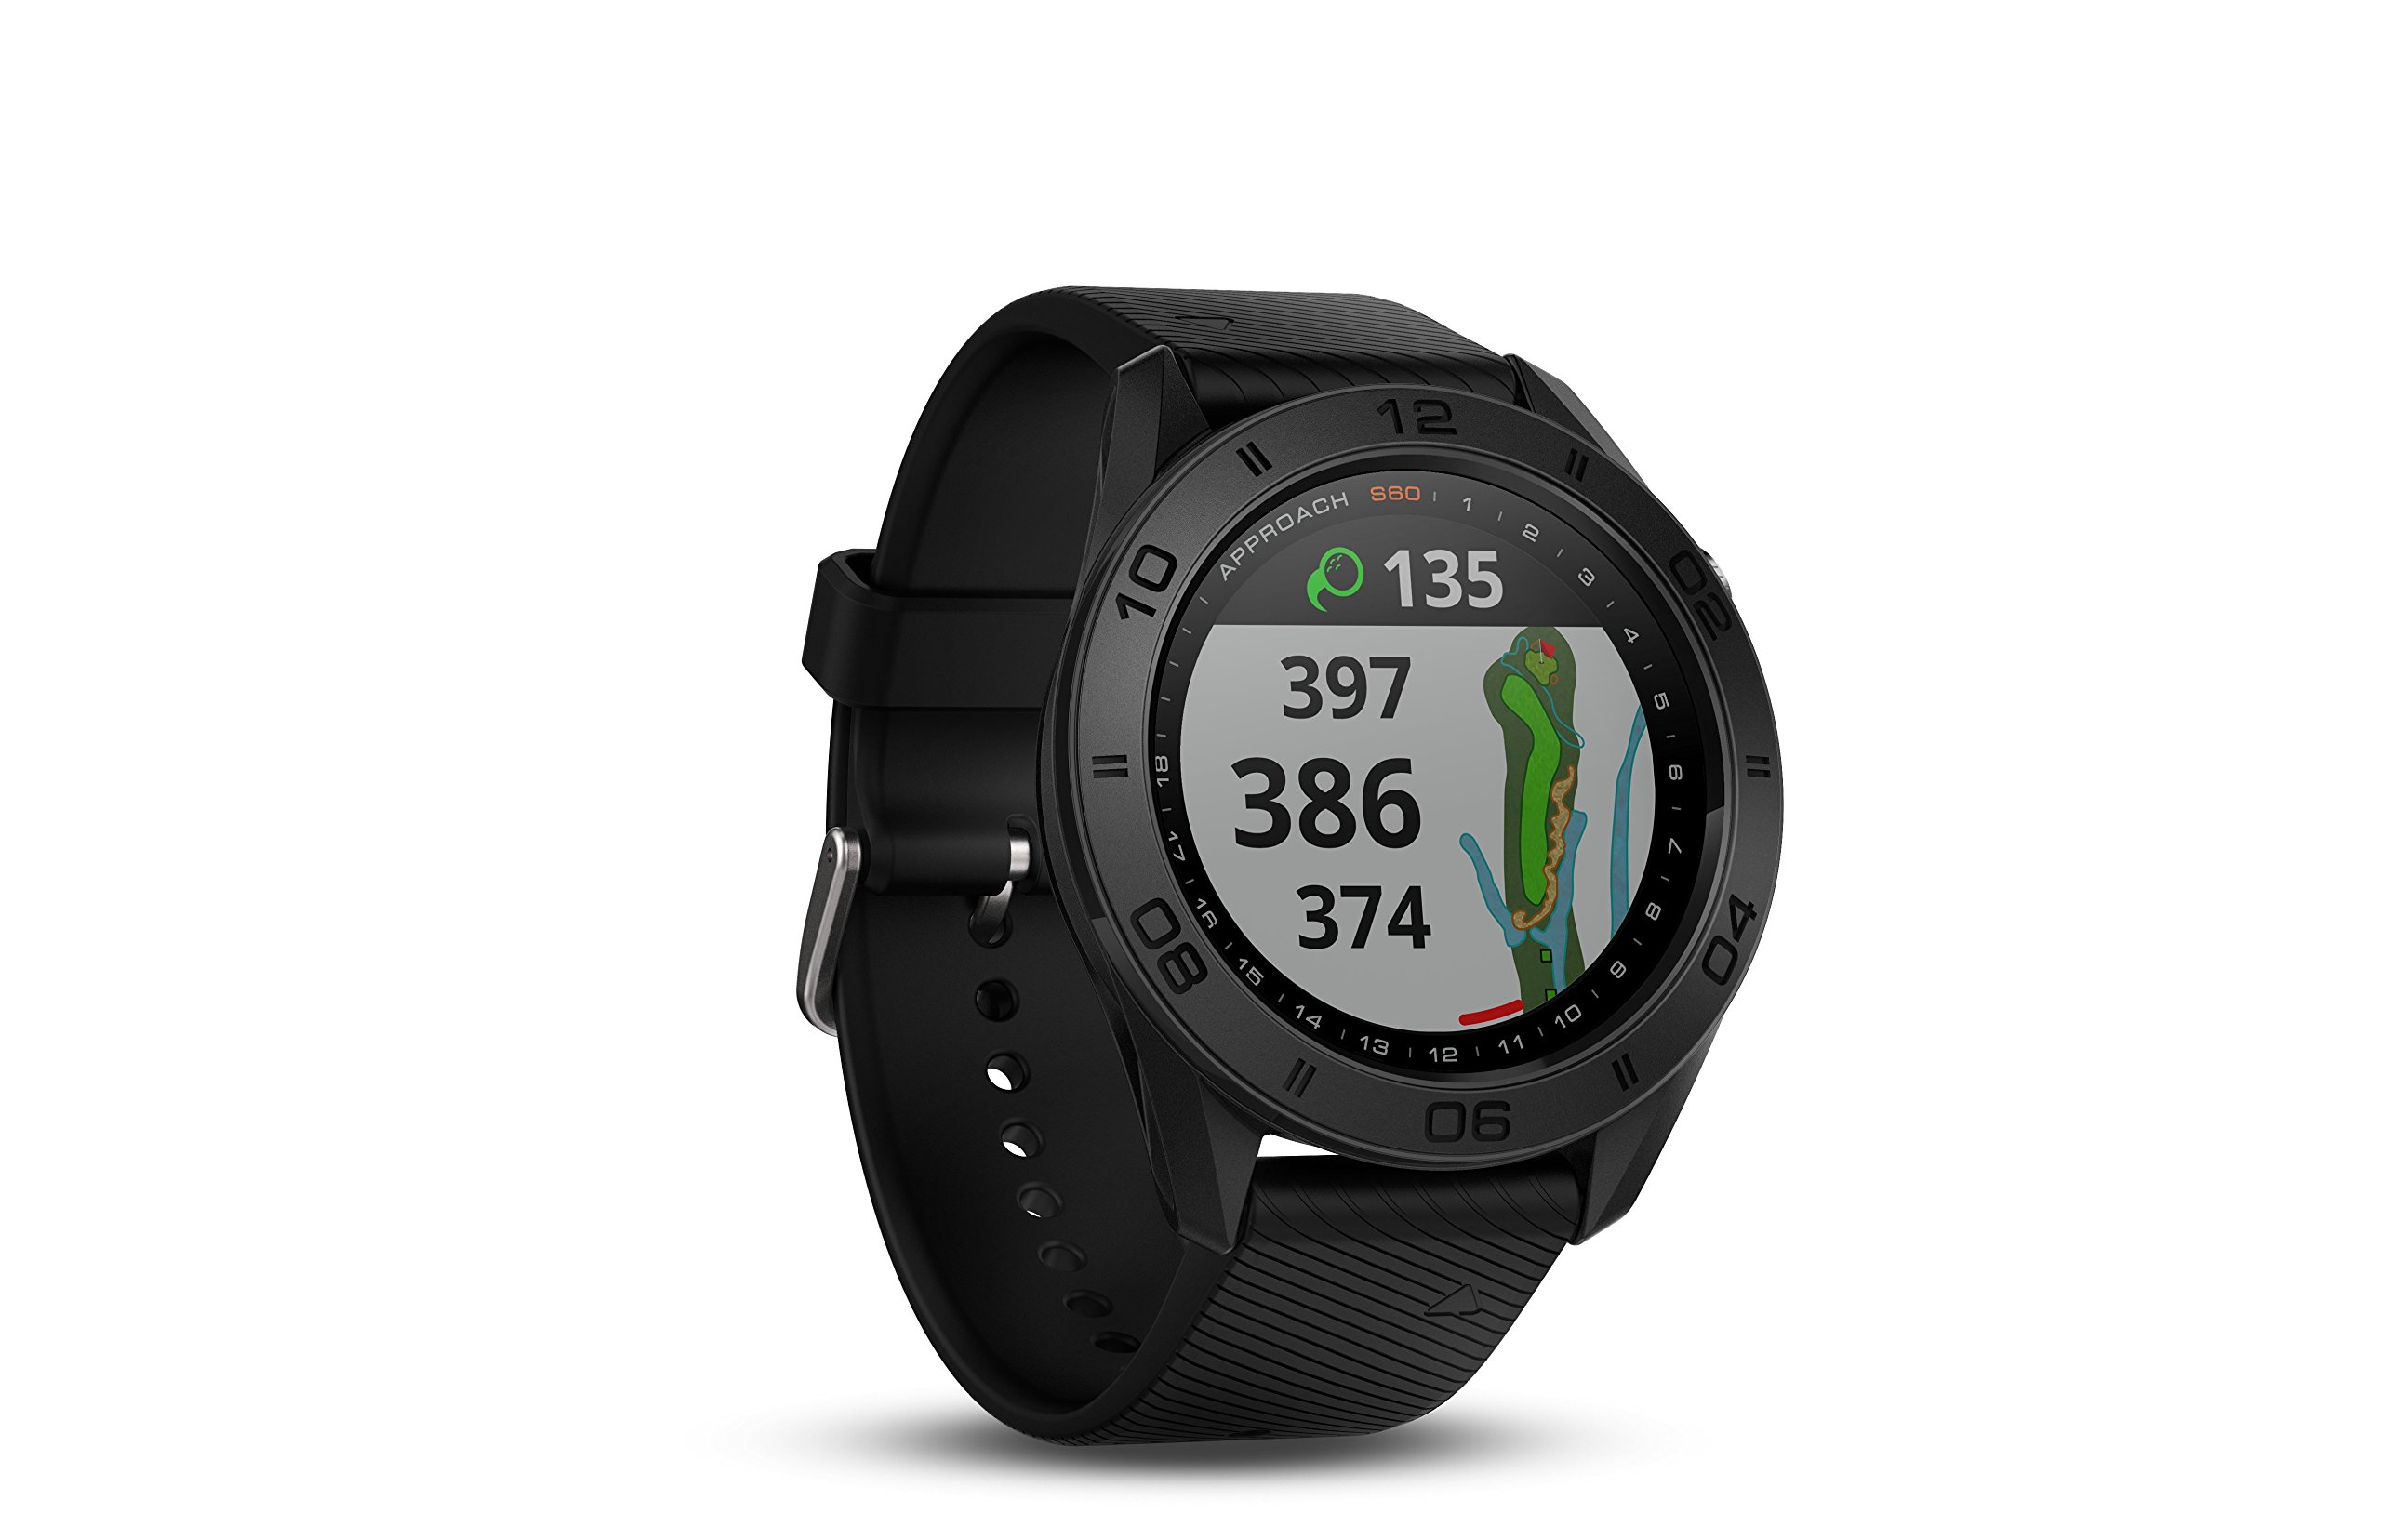 Garmin Approach S60, Premium GPS Golf Watch with Touchscreen Display and Full Color CourseView Mapping, Black w/ Silicone Band